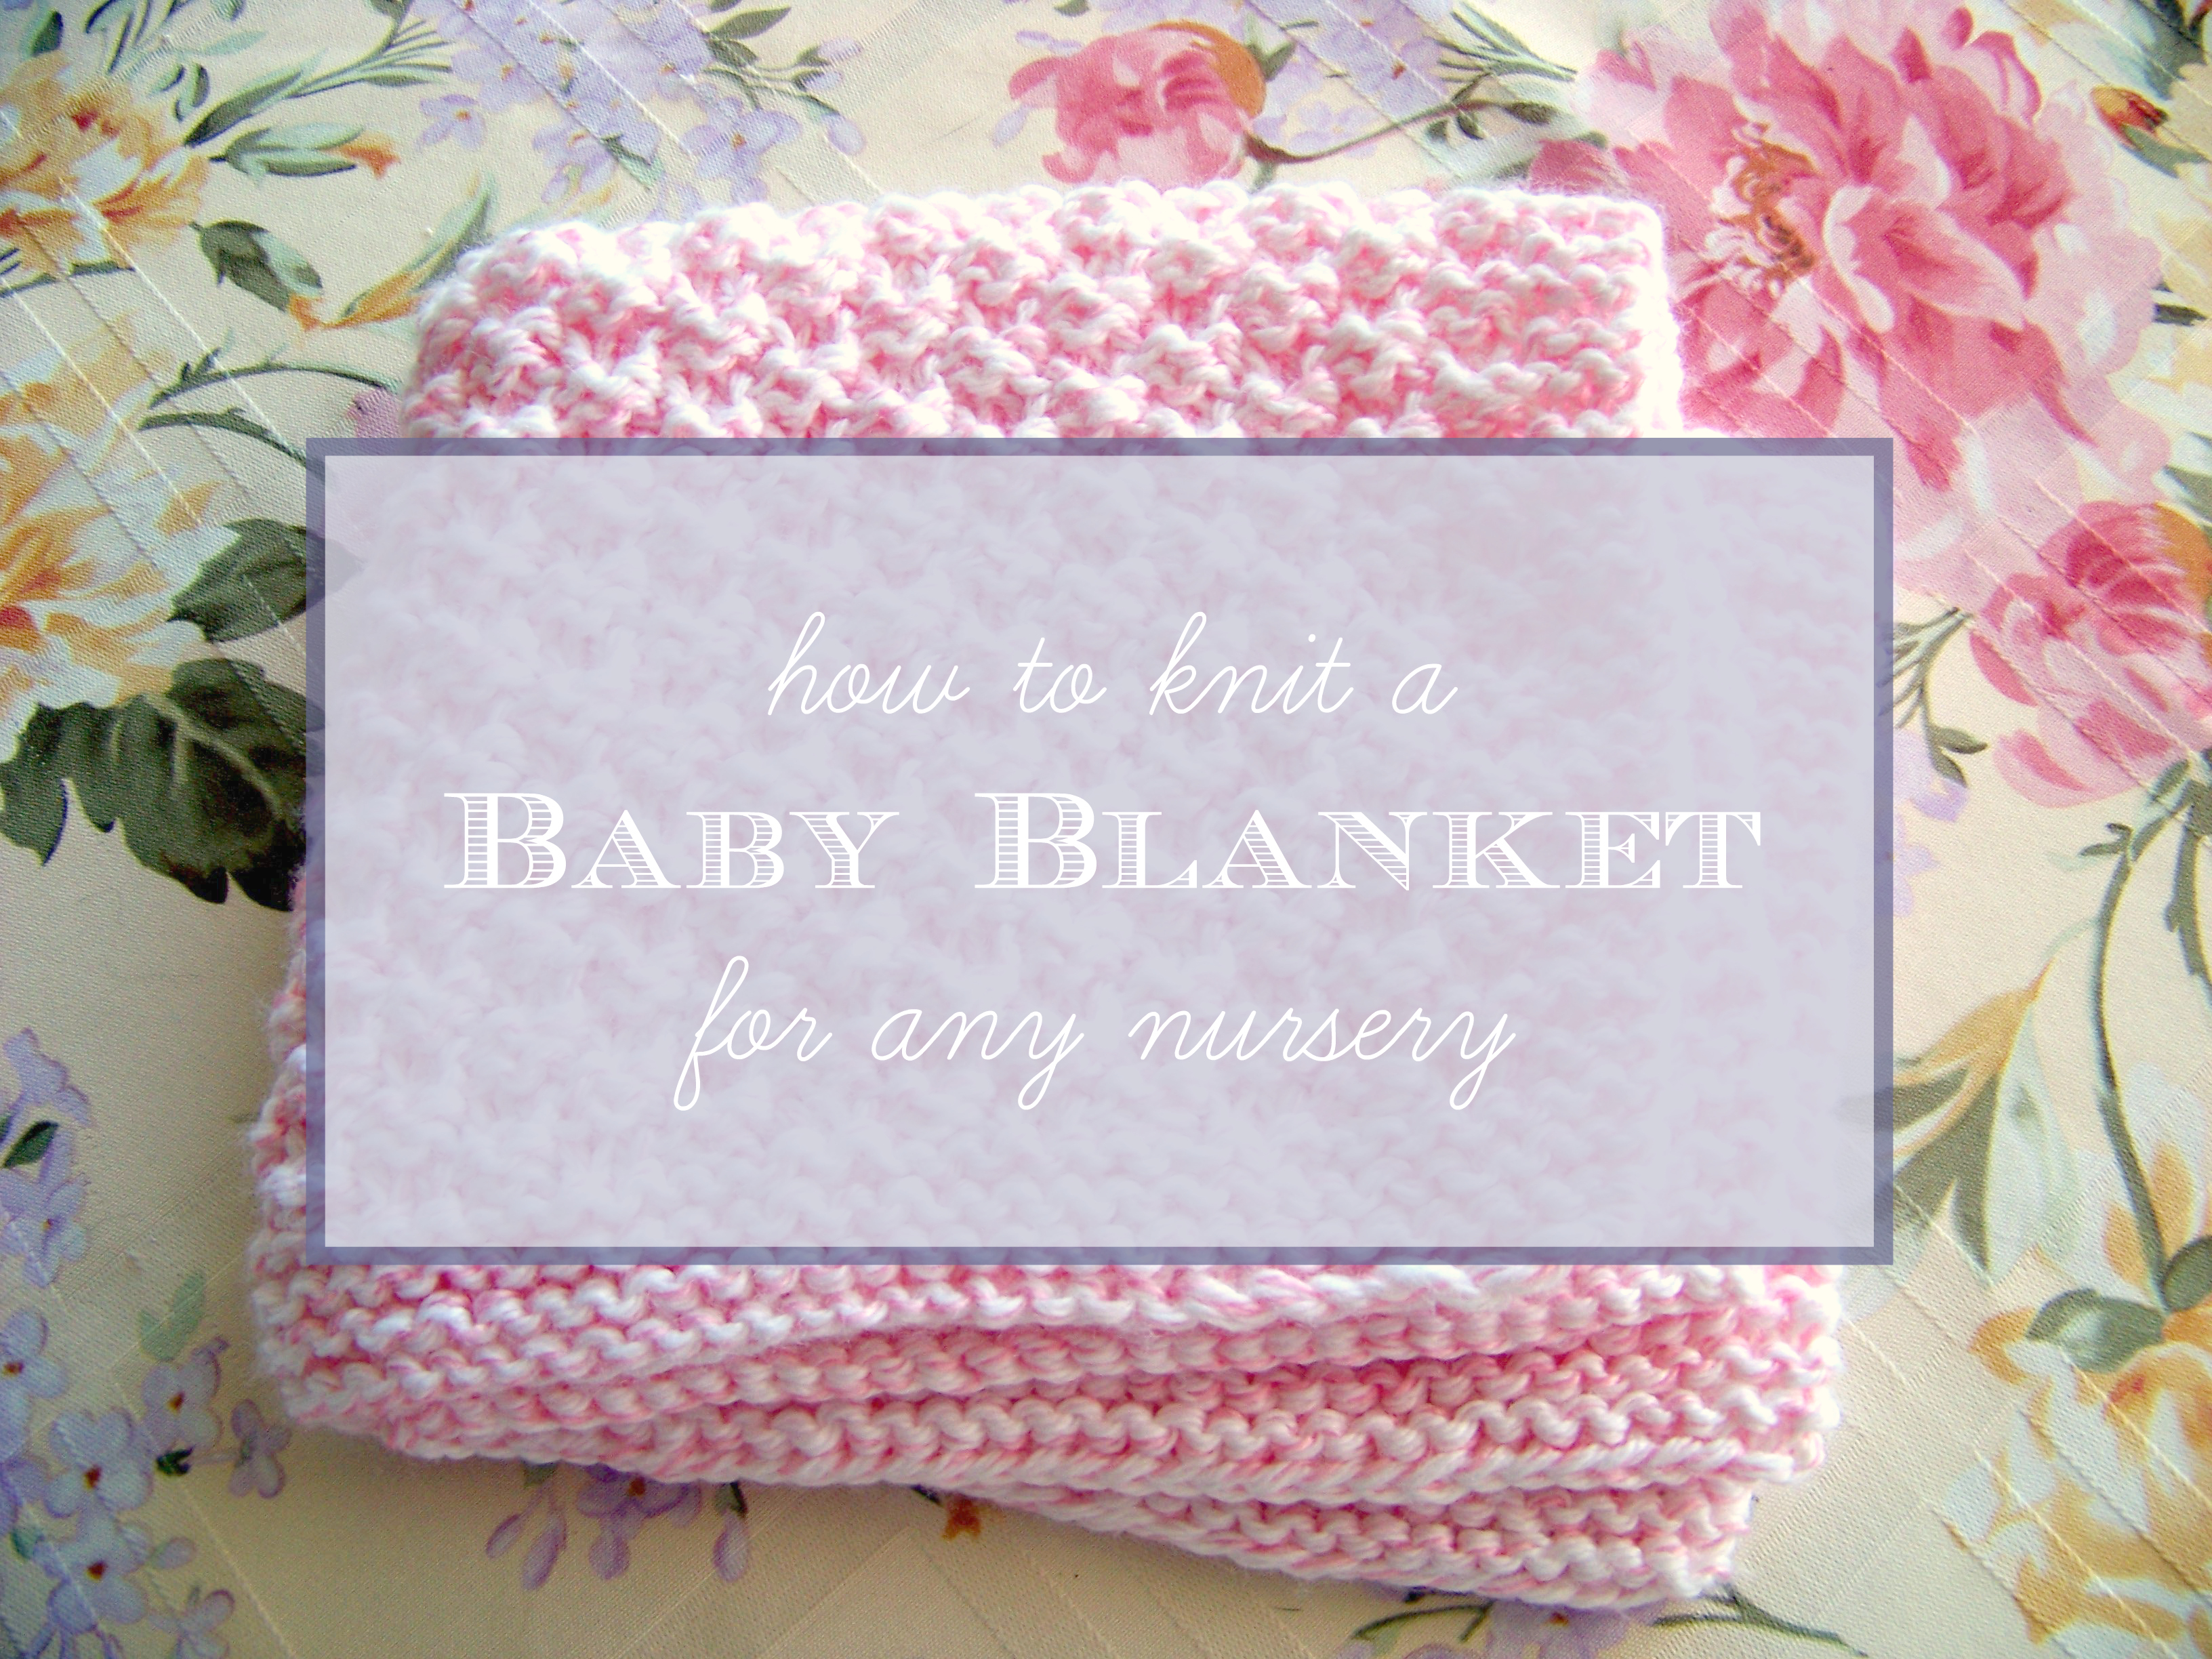 Knitting Patterns For Baby Blankets Easy How To Knit A Ba Blanket